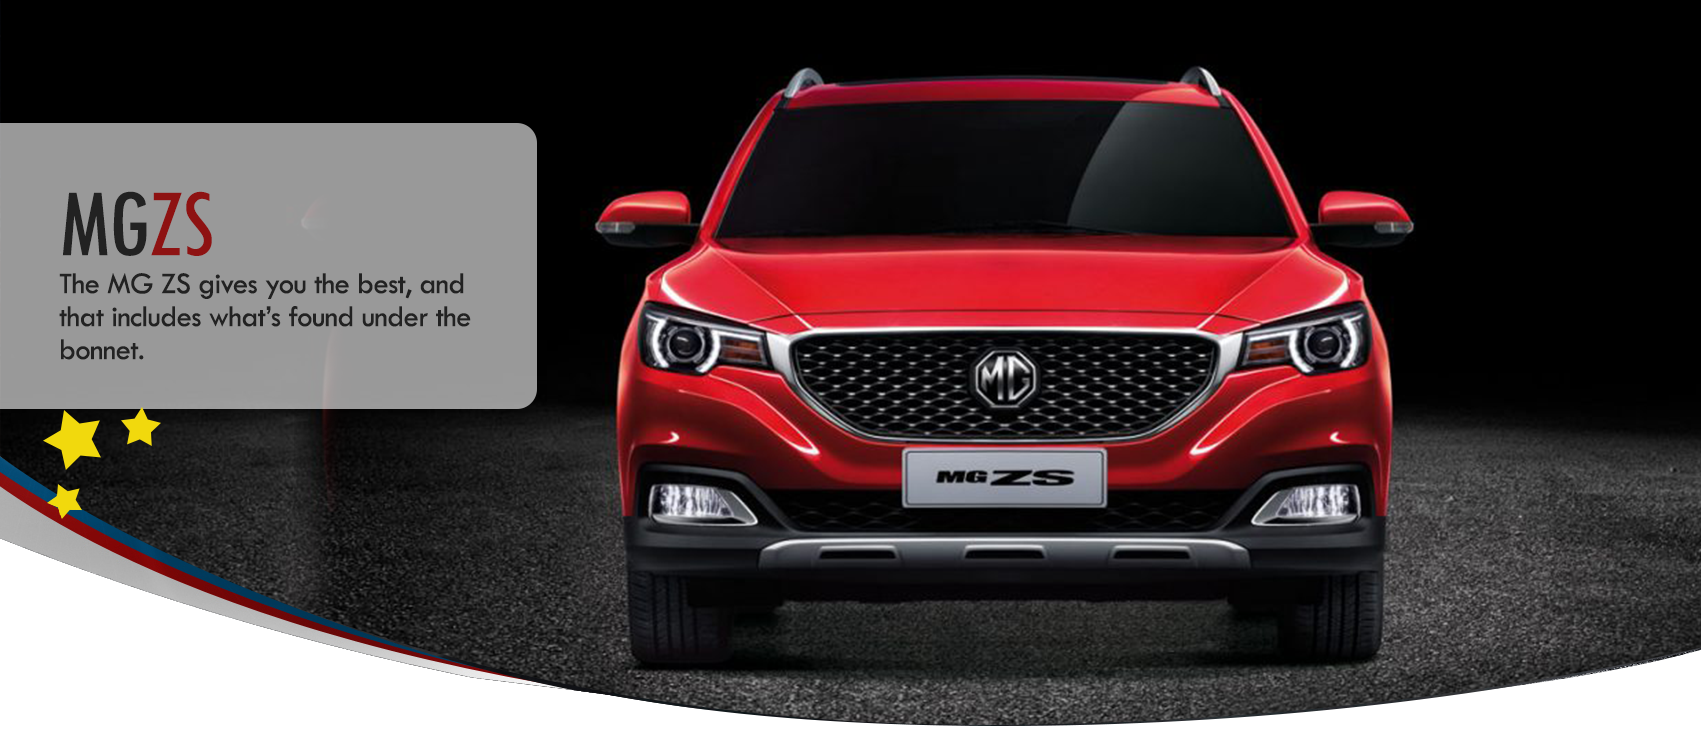 Mg Cars Philippines